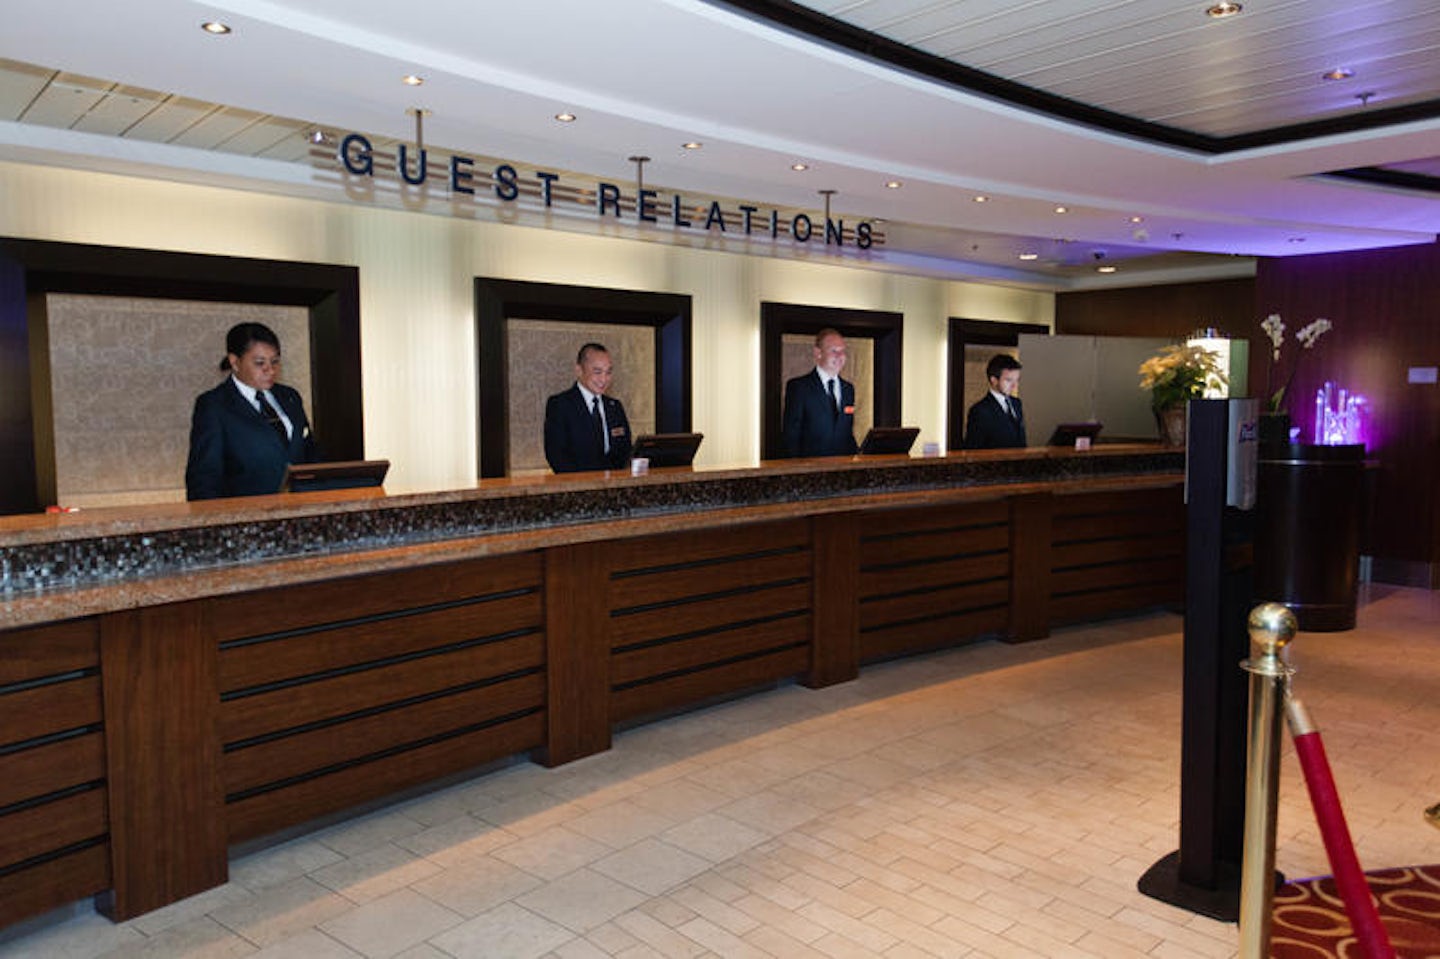 Guest Relations Desk on Celebrity Silhouette